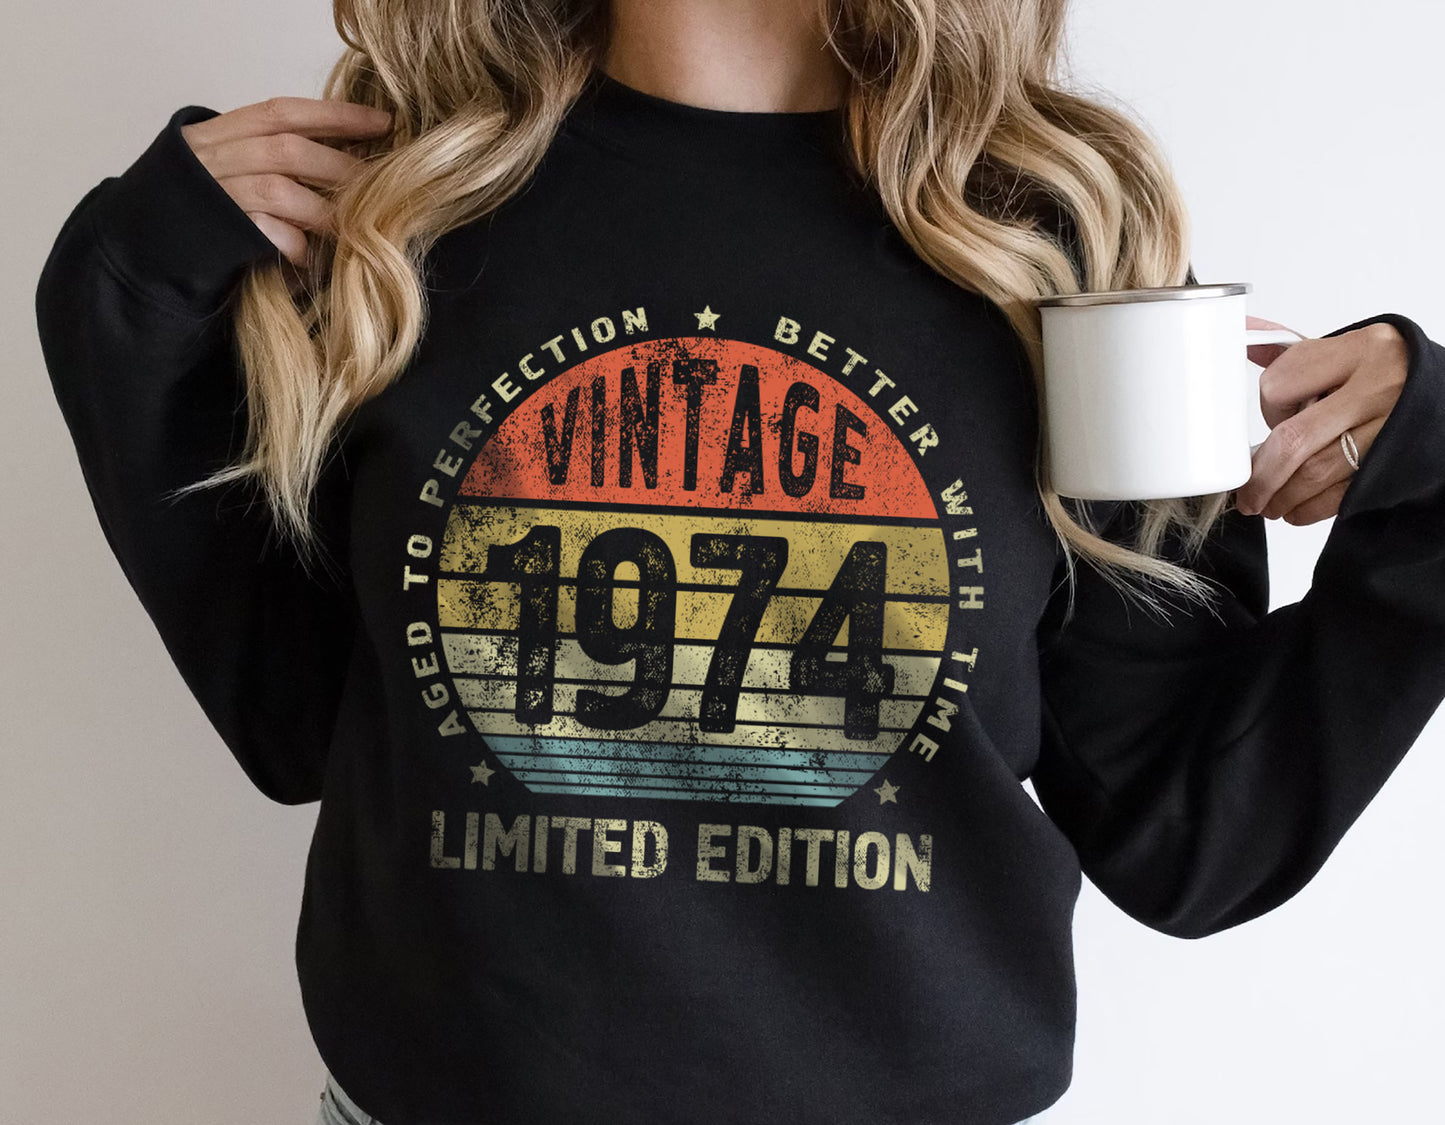 50th birthday gifts, Vintage 1974 Shirt, Aged to Perfection Better with Time